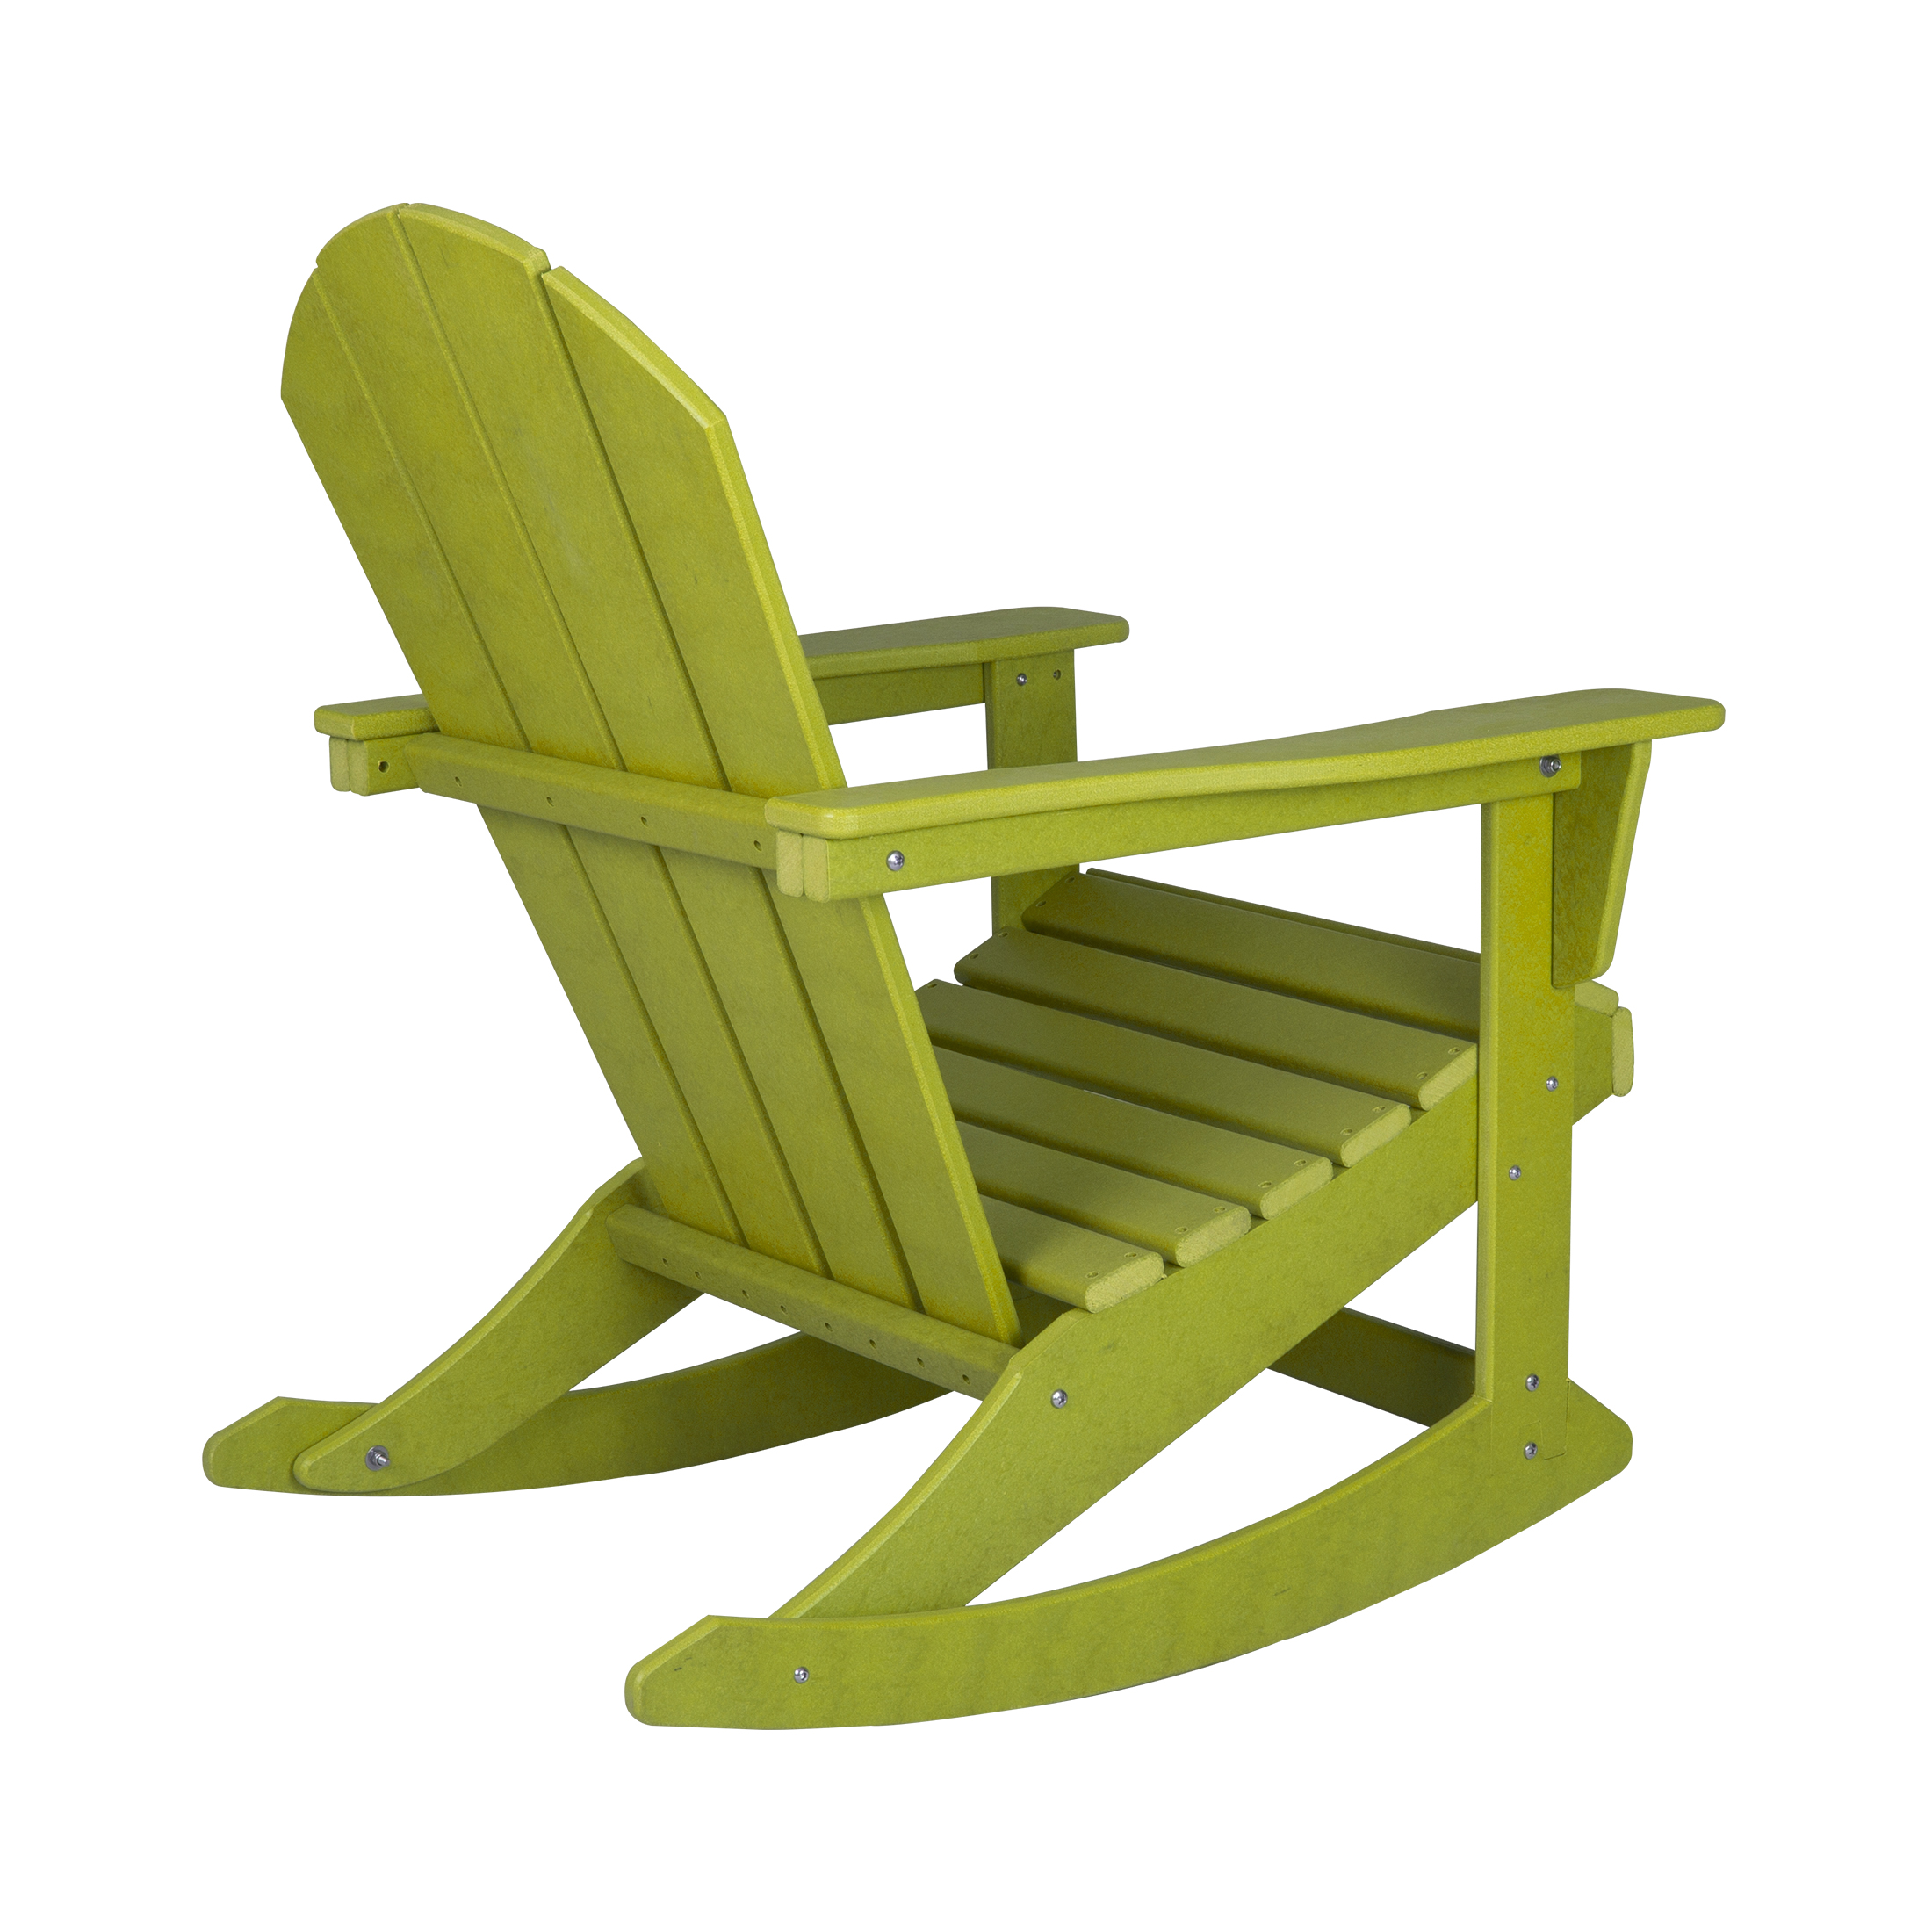 GARDEN Plastic Adirondack Rocking Chair for Outdoor Patio Porch Seating, Lime - image 3 of 7